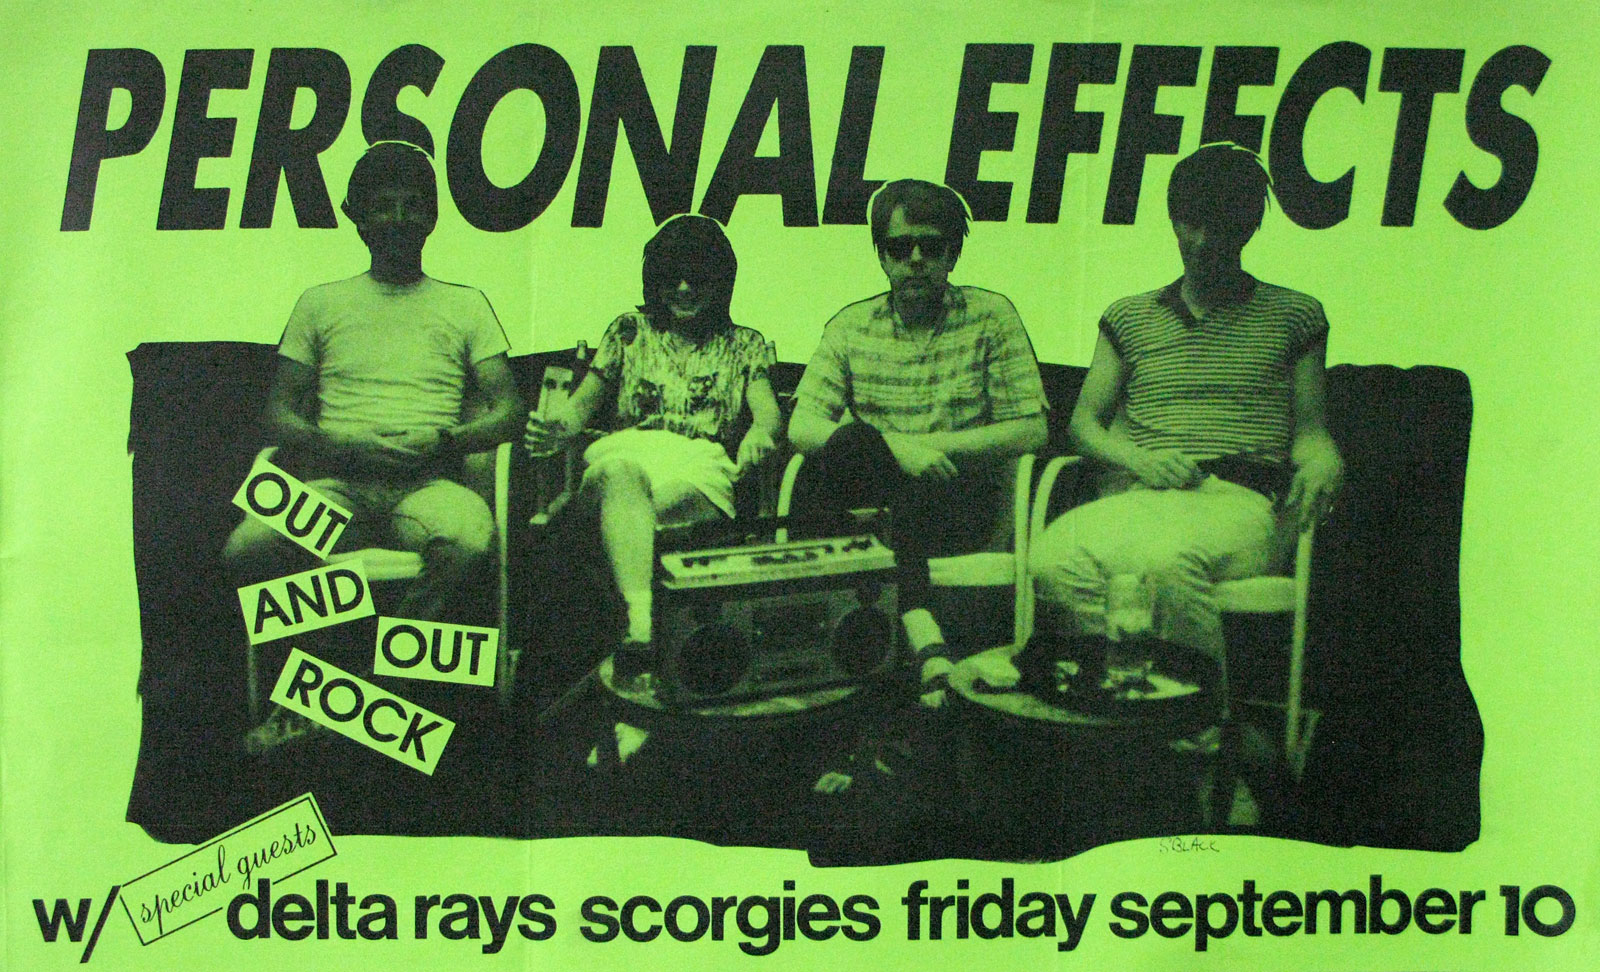 Poster for Personal Effects with the Delta Rays at Scorgie's in Rochester, New York on 09.10.1982